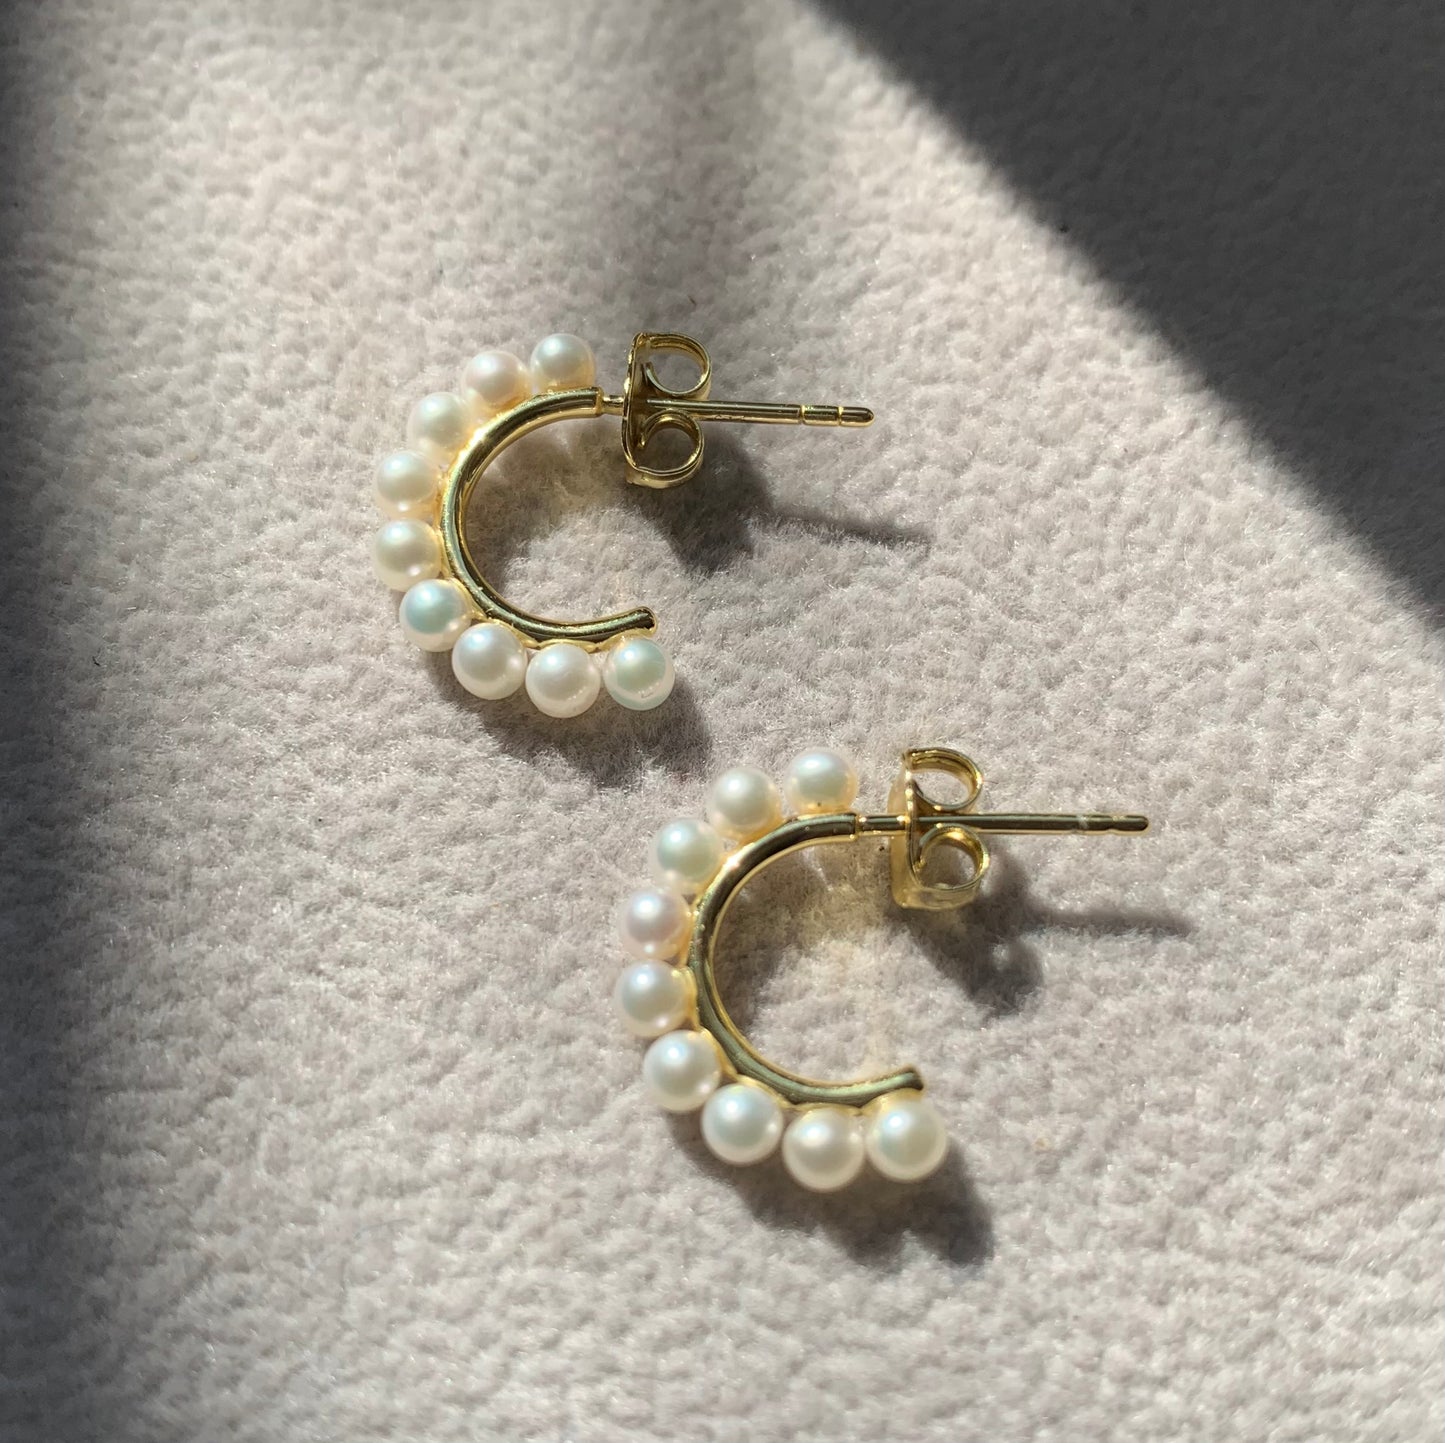 Credo Small Gold Vermeil Hoop Earrings with Small Cultured Freshwater Pearls